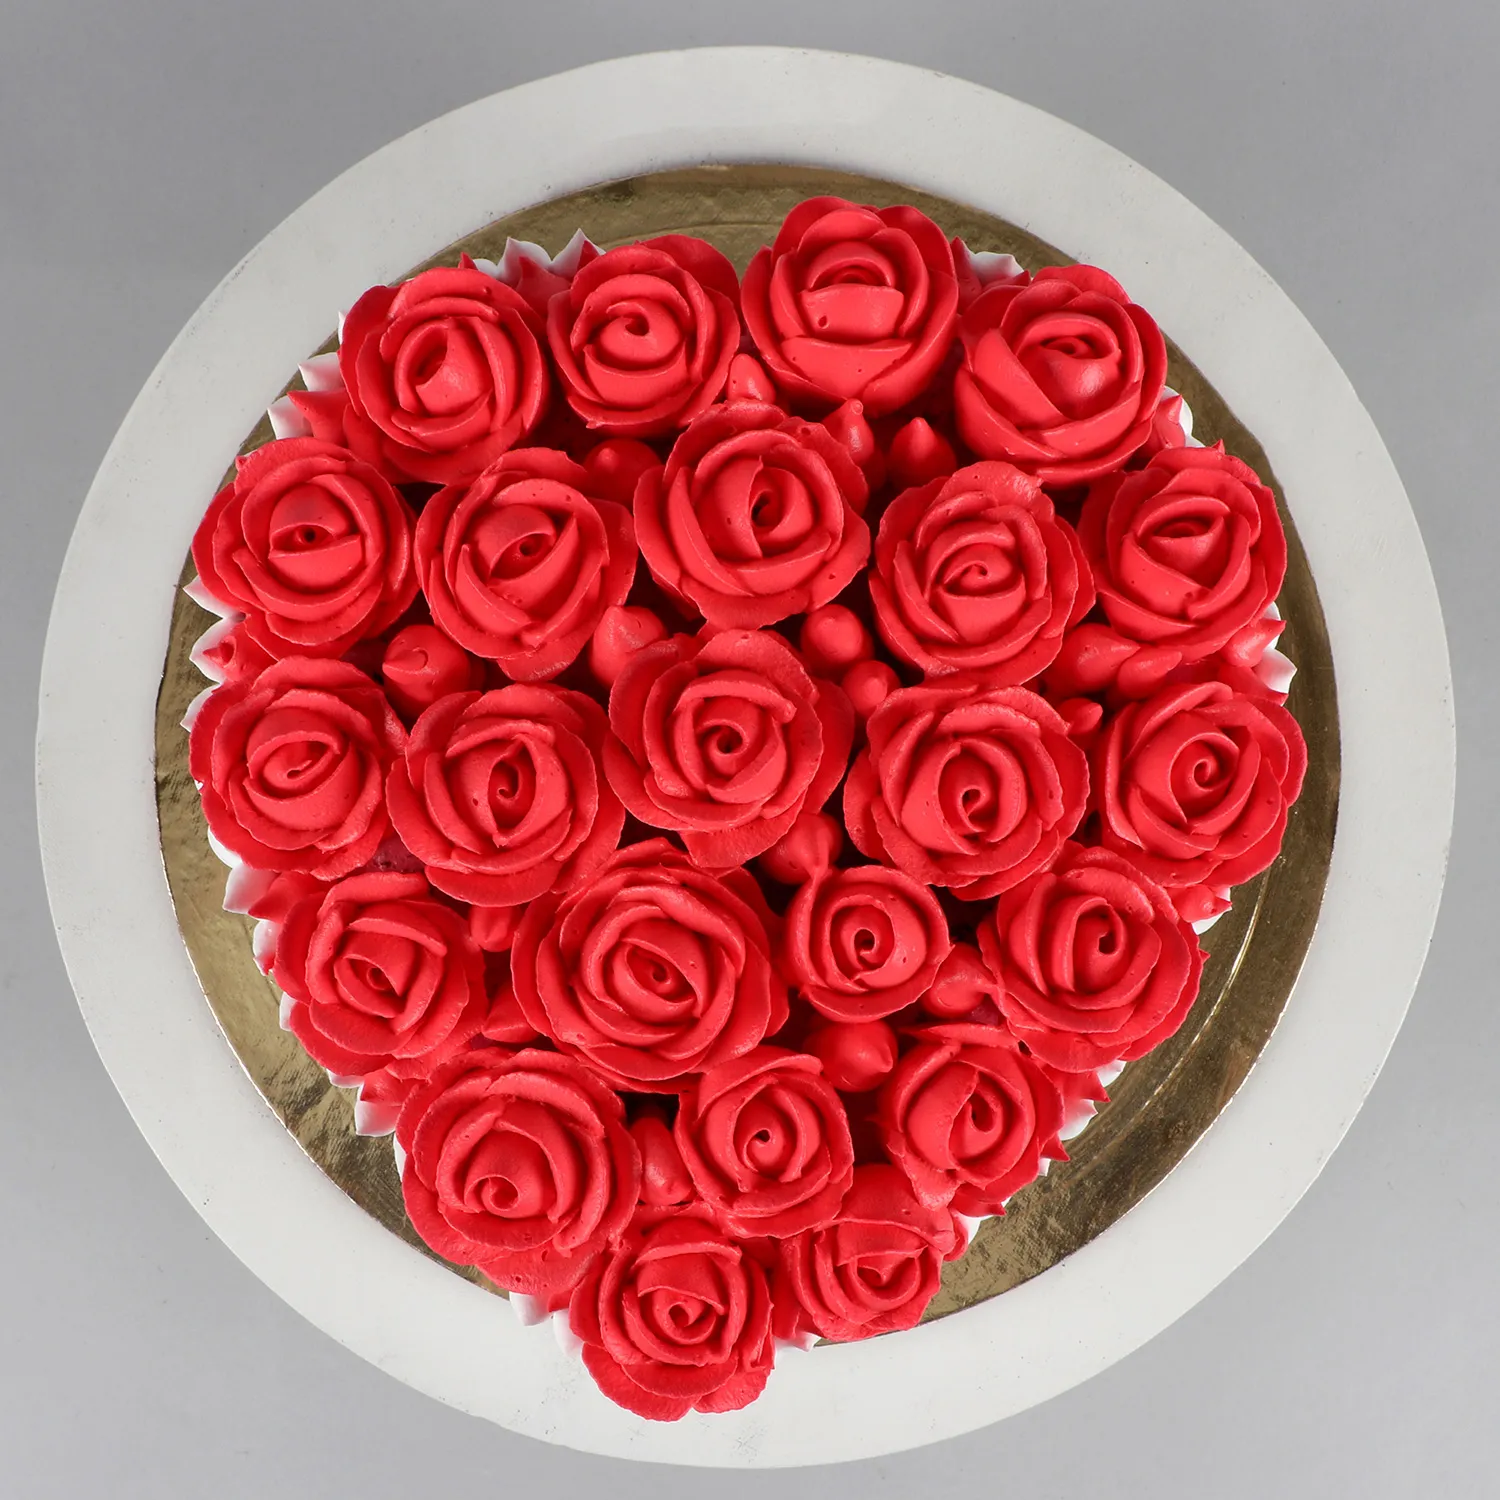 How to make a Heart shaped cake with fresh roses!! - YouTube